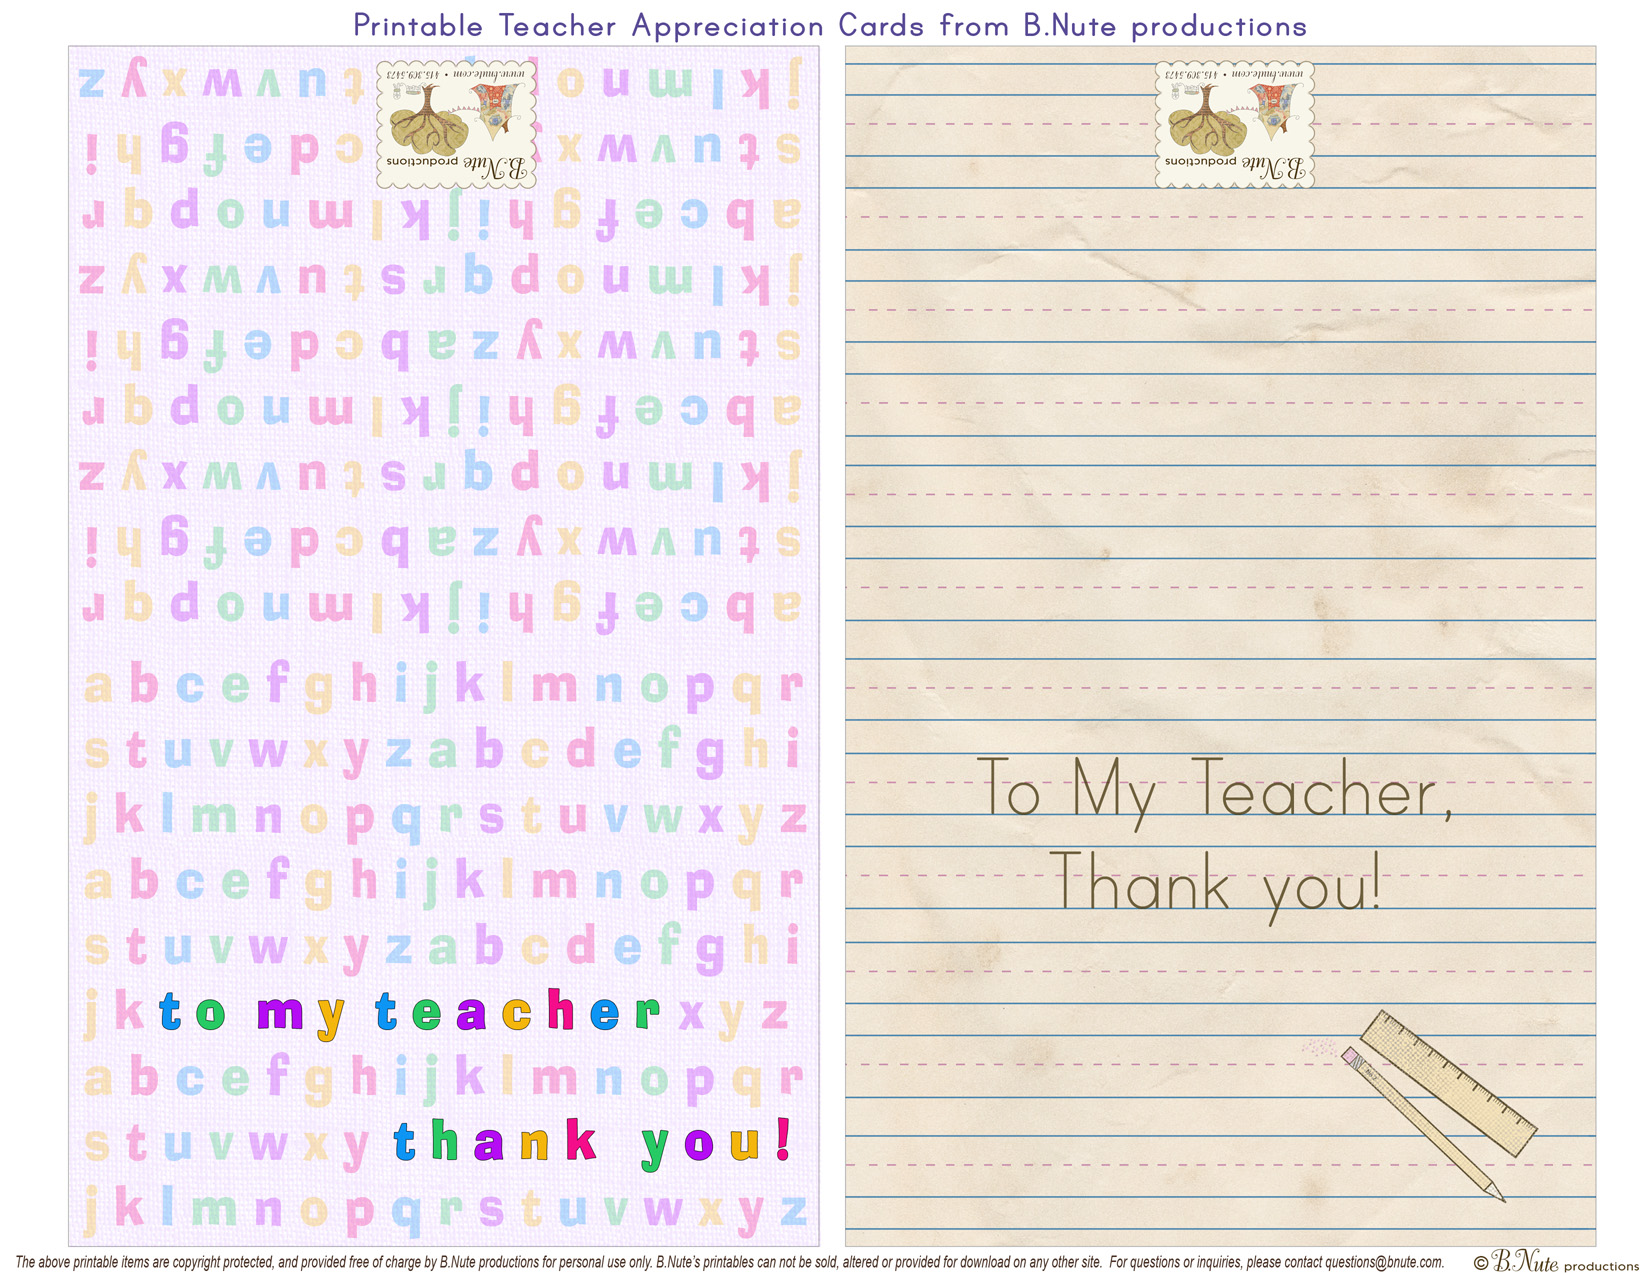 bnute-productions-free-printable-teacher-appreciation-cards